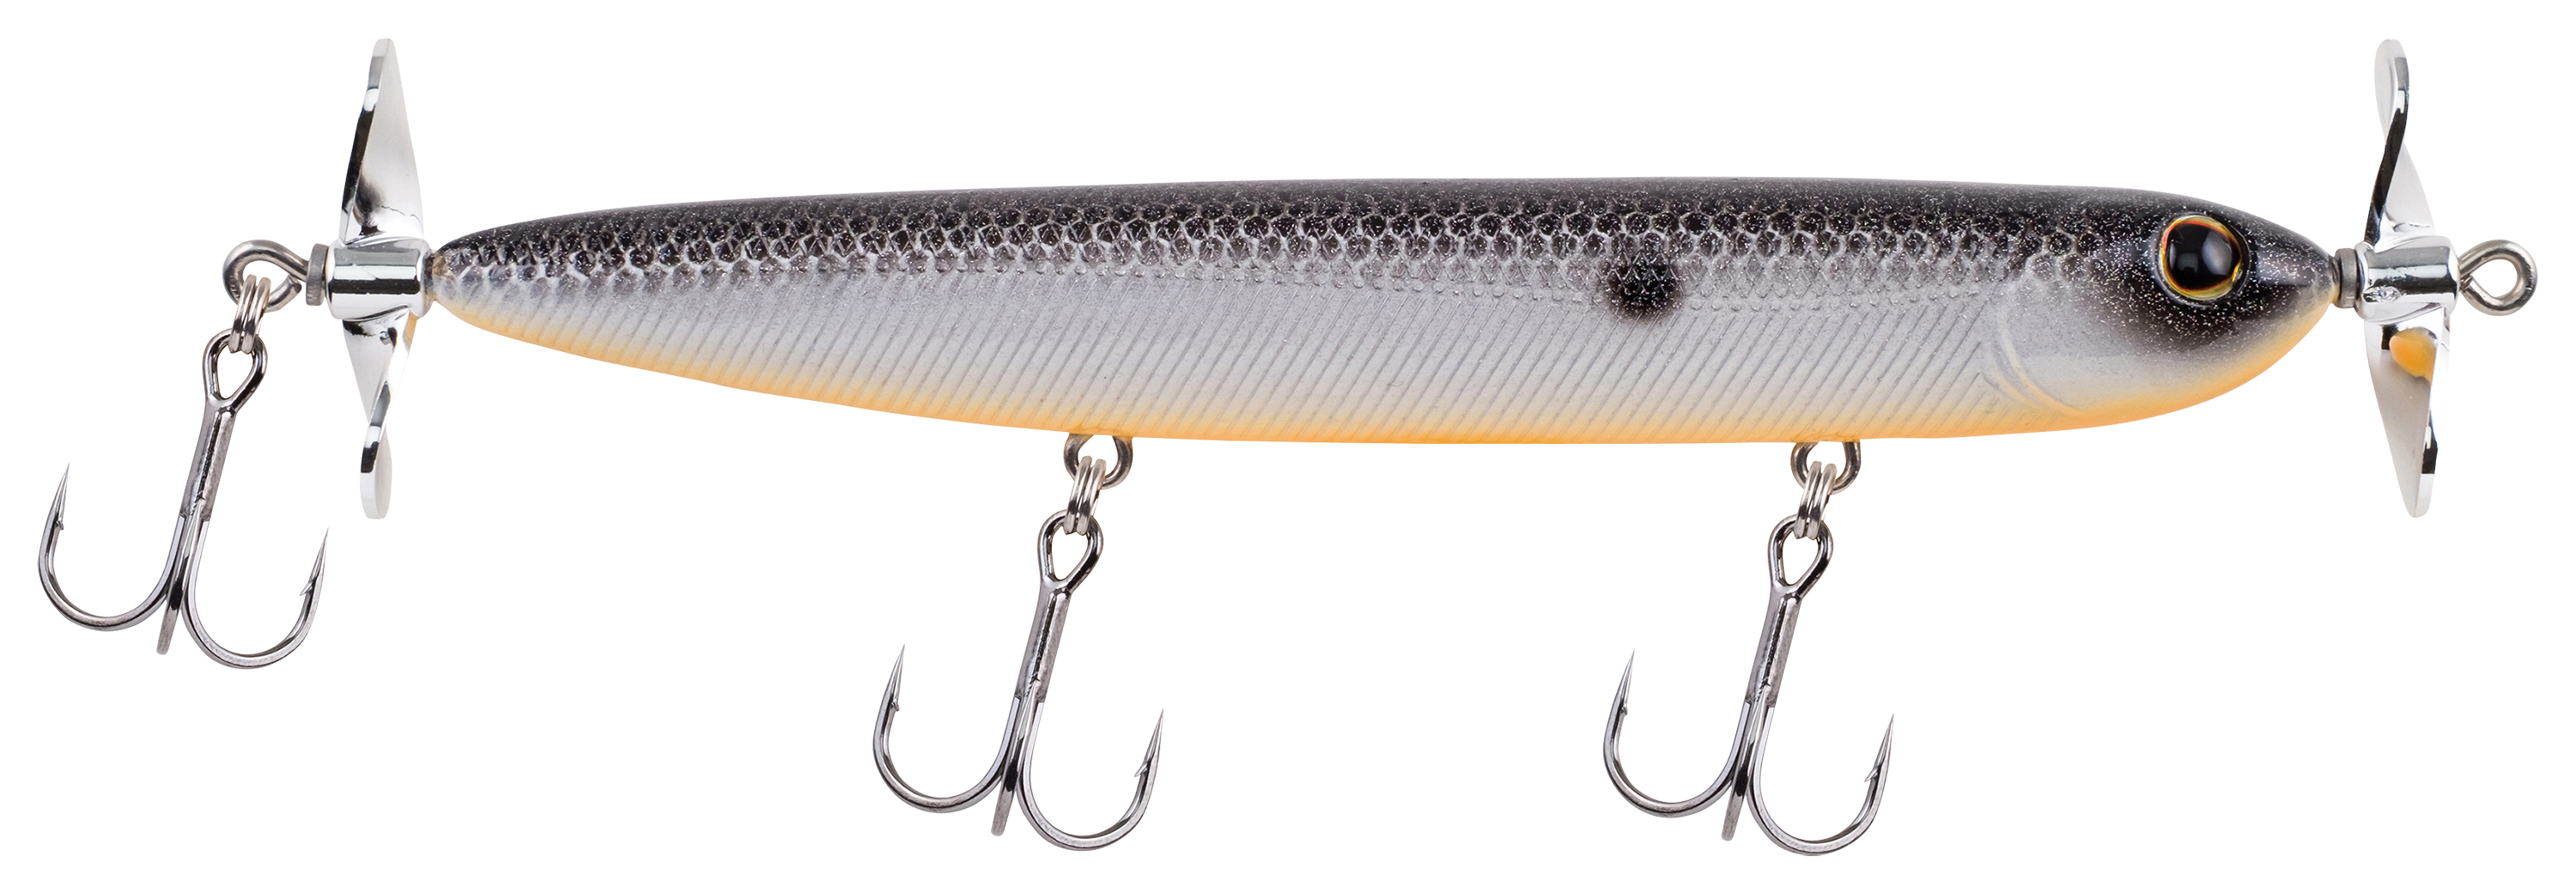 Pelican Lures The Myth Buster Ruler - Cabelas - PELICAN - Scales 